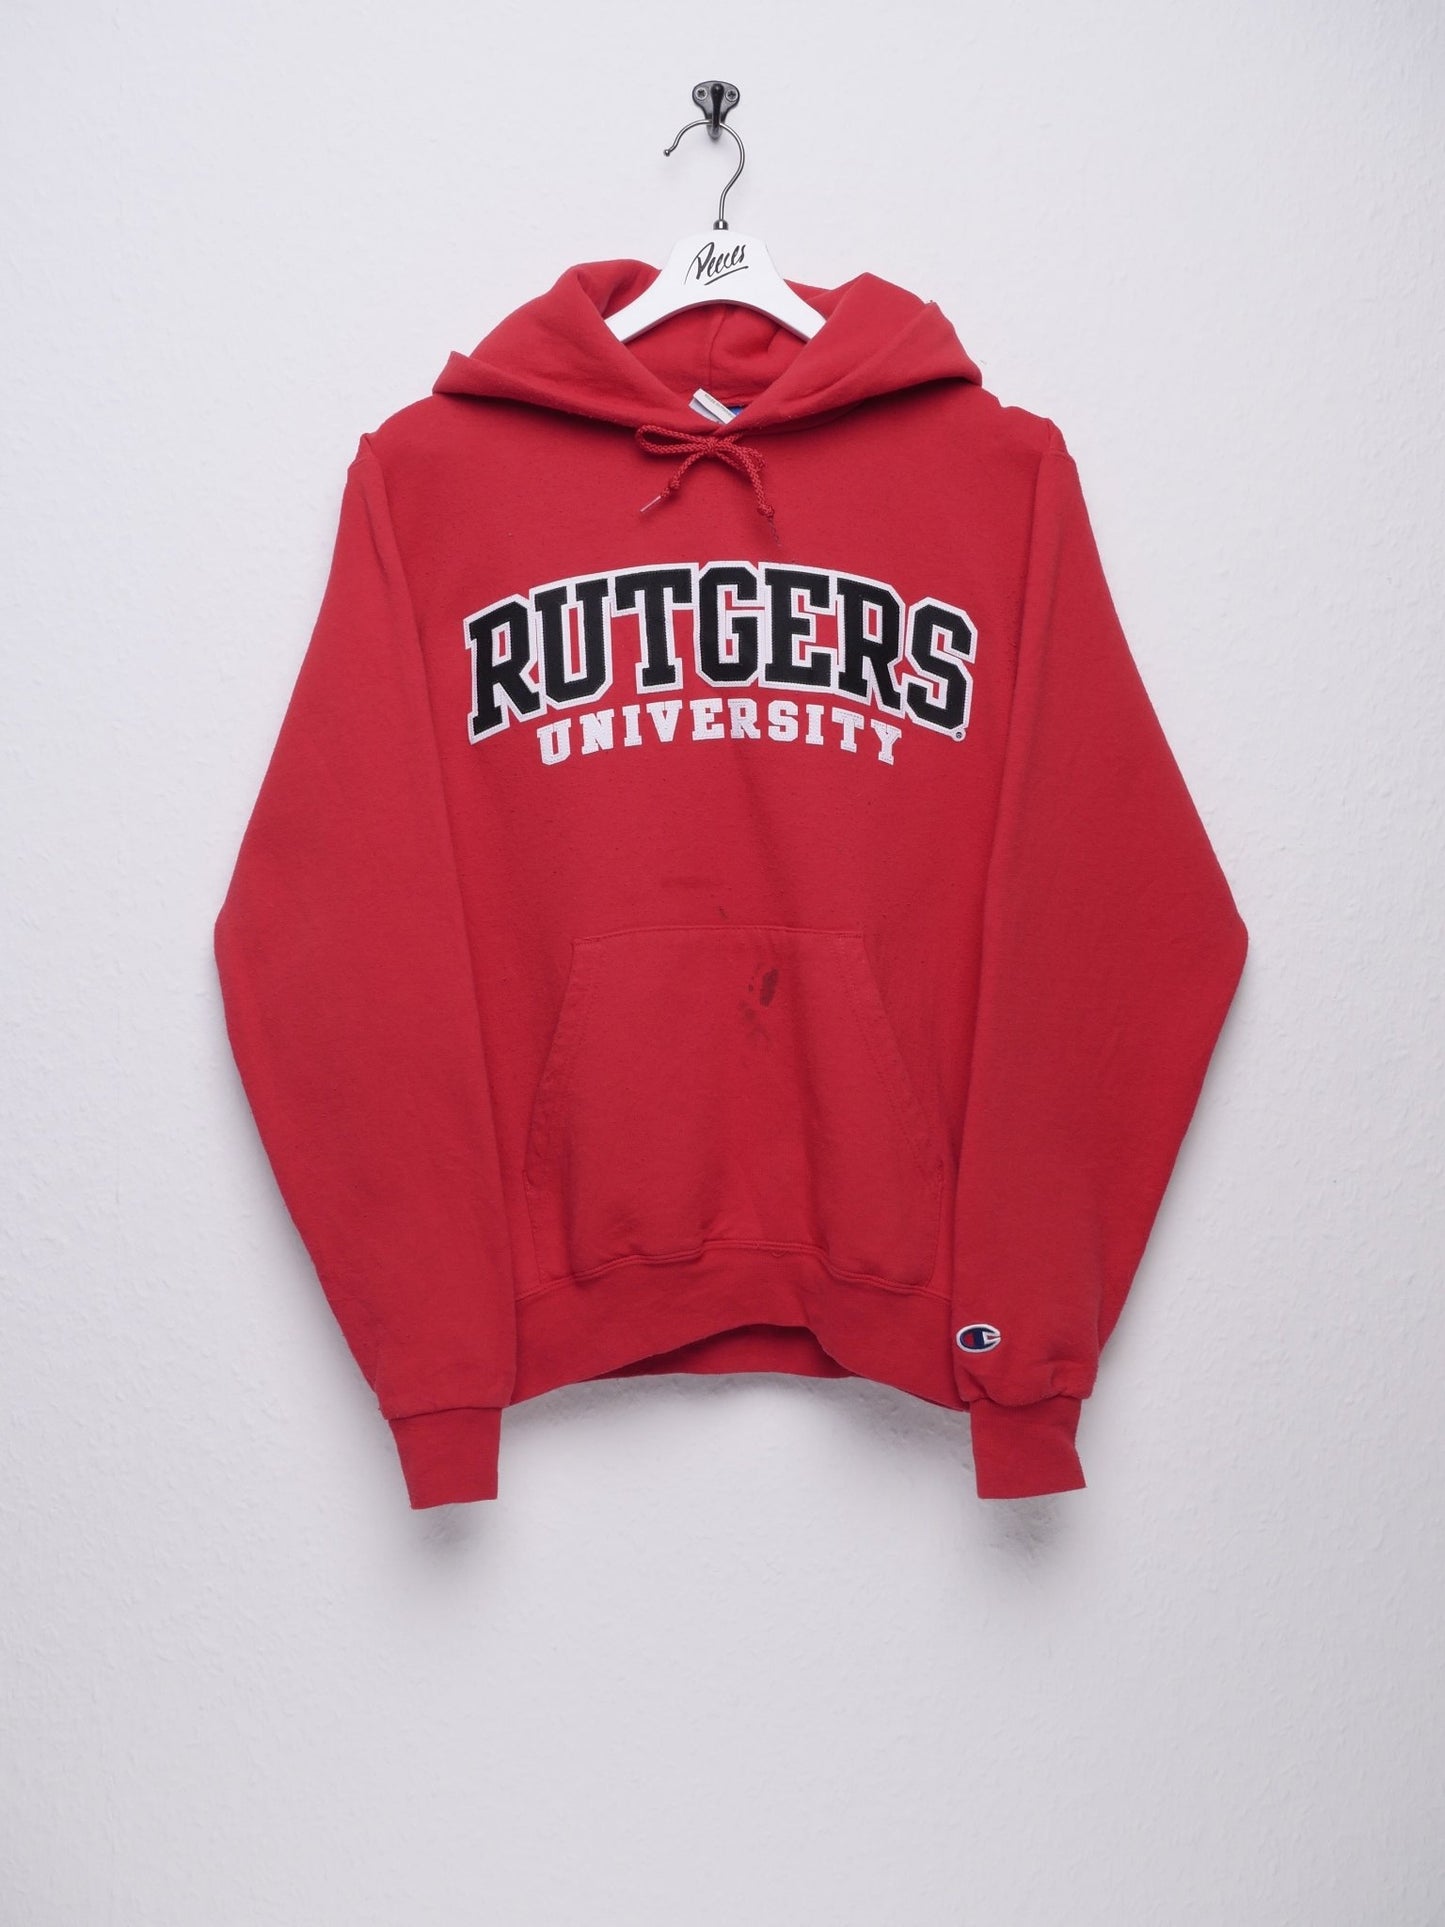 champion Rutgers University embroidered Logo red Hoodie - Peeces